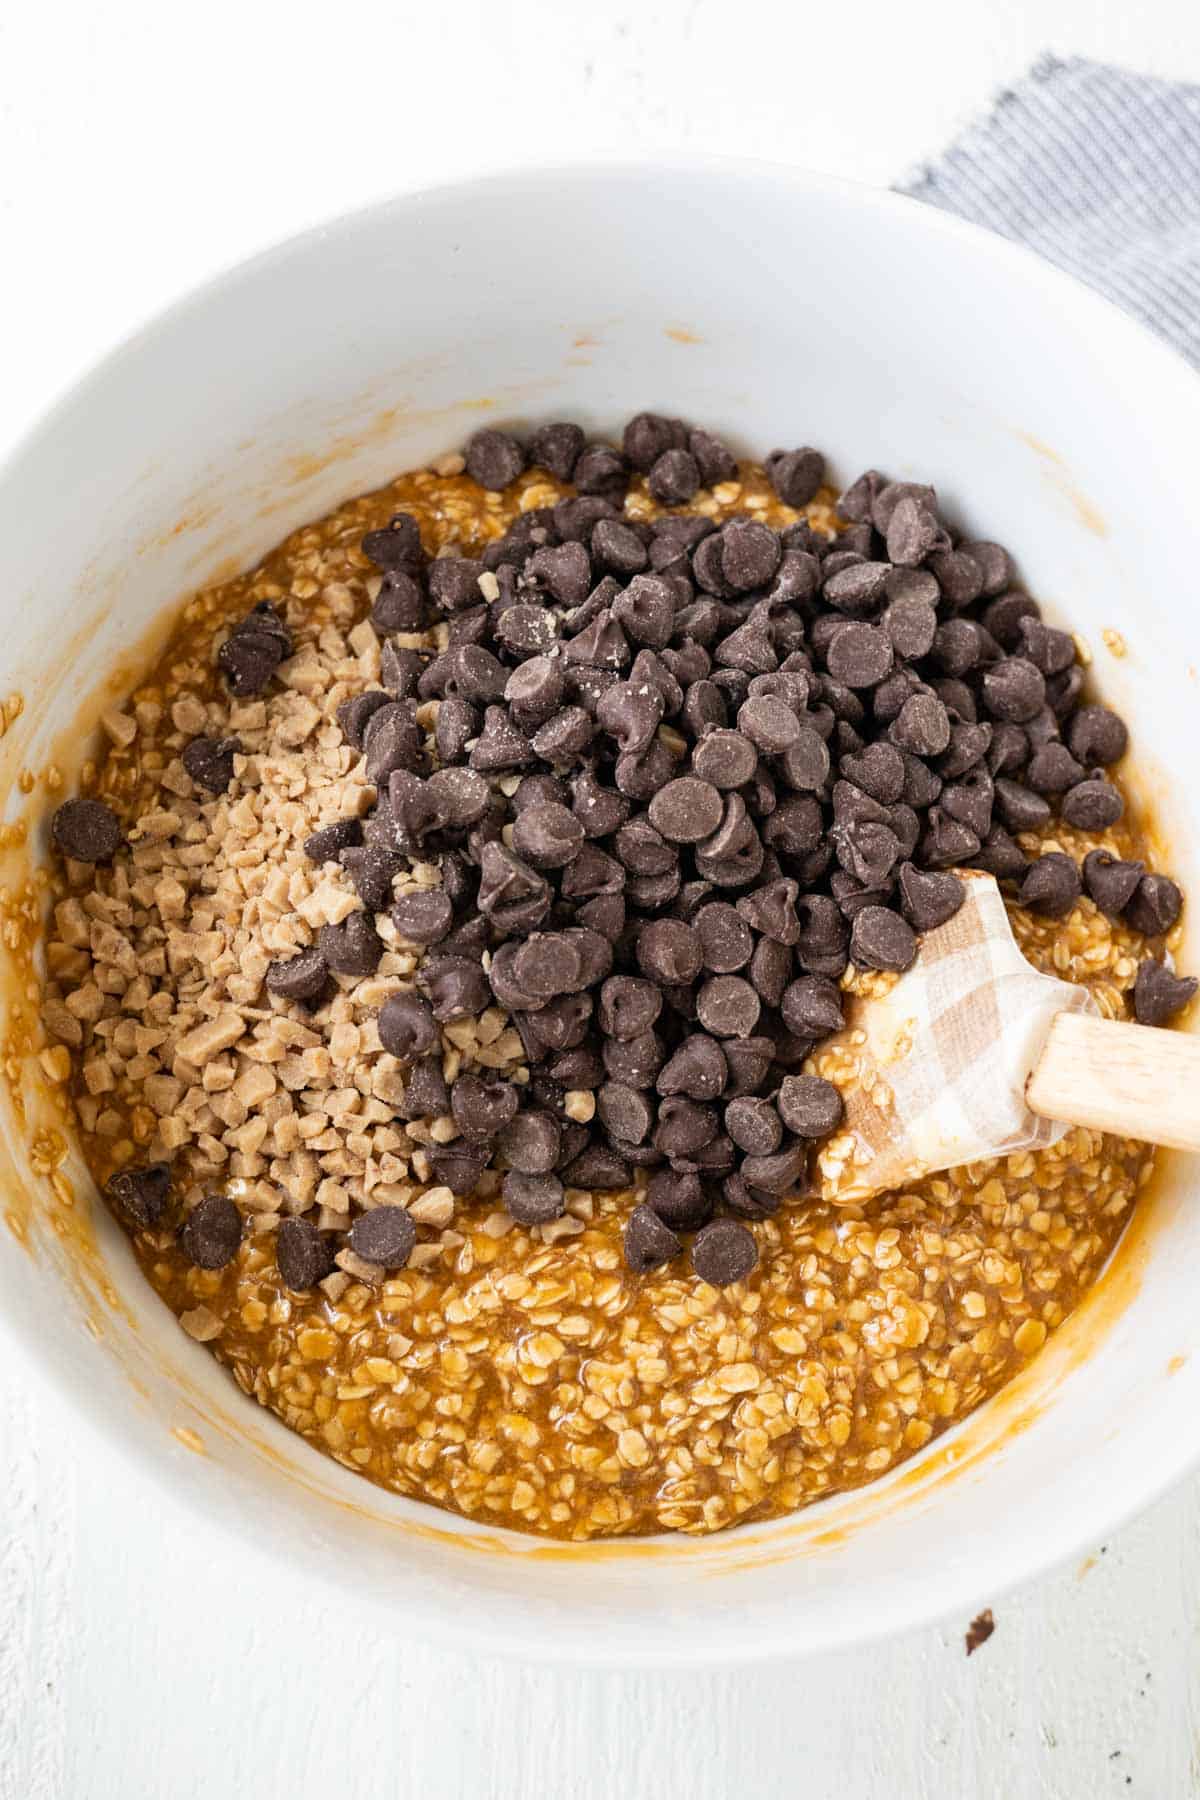 A caramel no bake cookie mixture with chocolate chips and toffee chips in a mixing bowl.